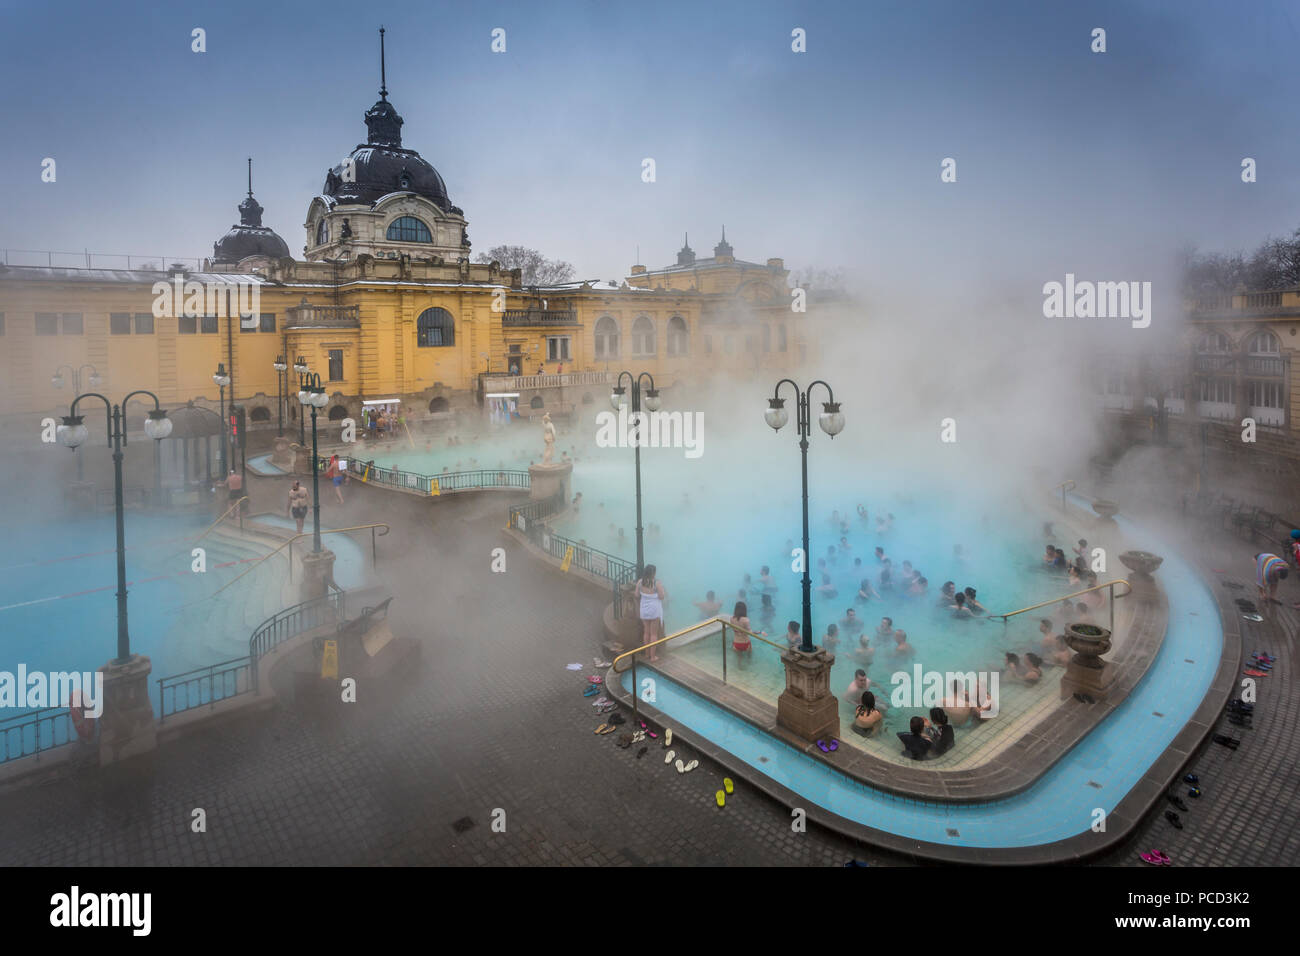 View of outside thermal spa at Szechenhu Thermal Bath in winter, Budapest, Hungary, Europe Stock Photo